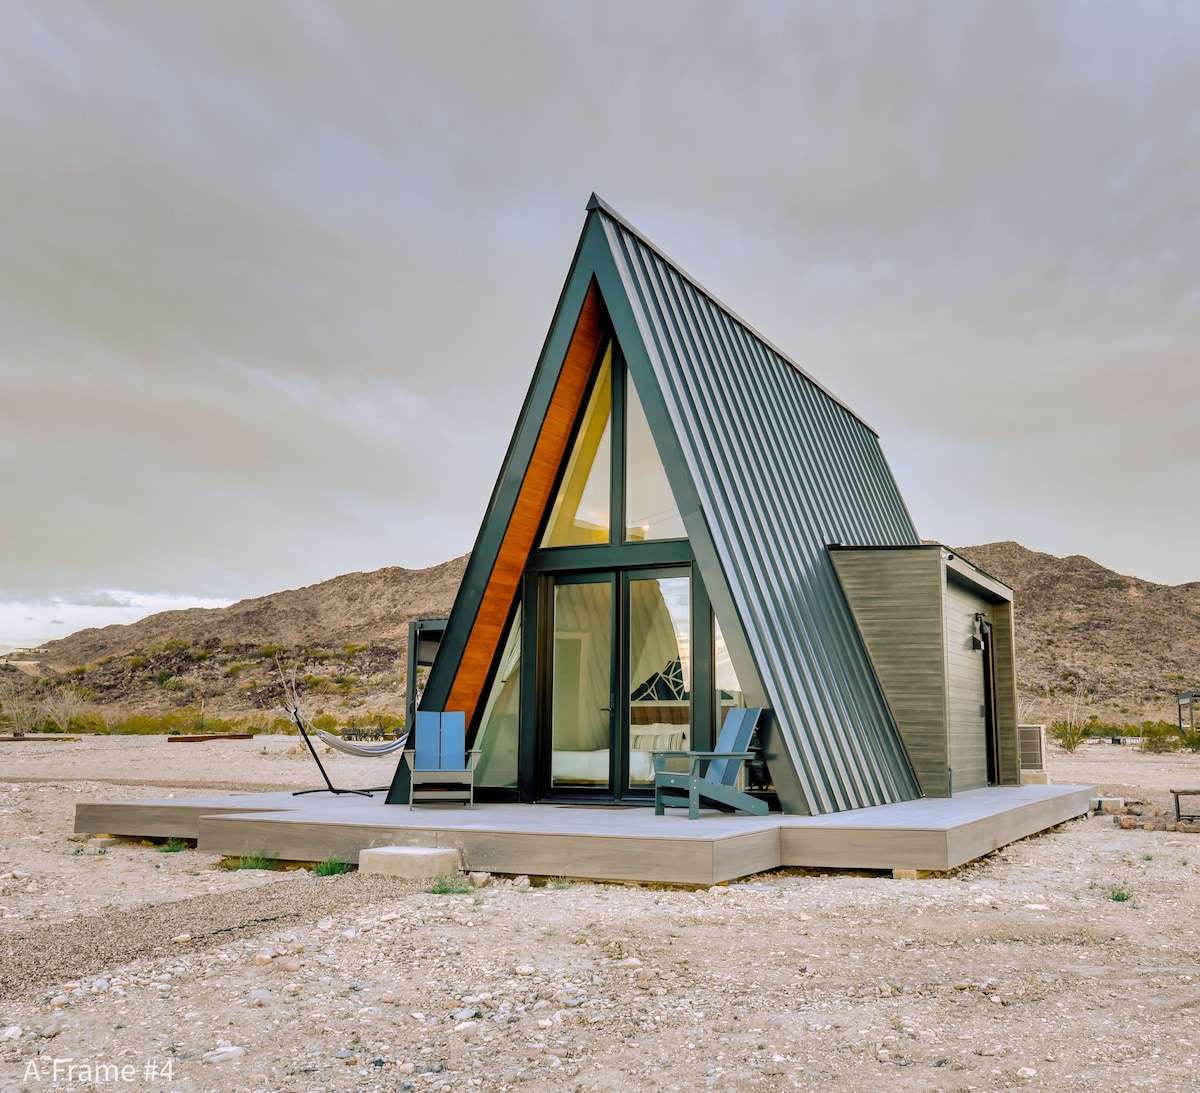 Stardust Big Bend Luxury A-Frame#4 great views